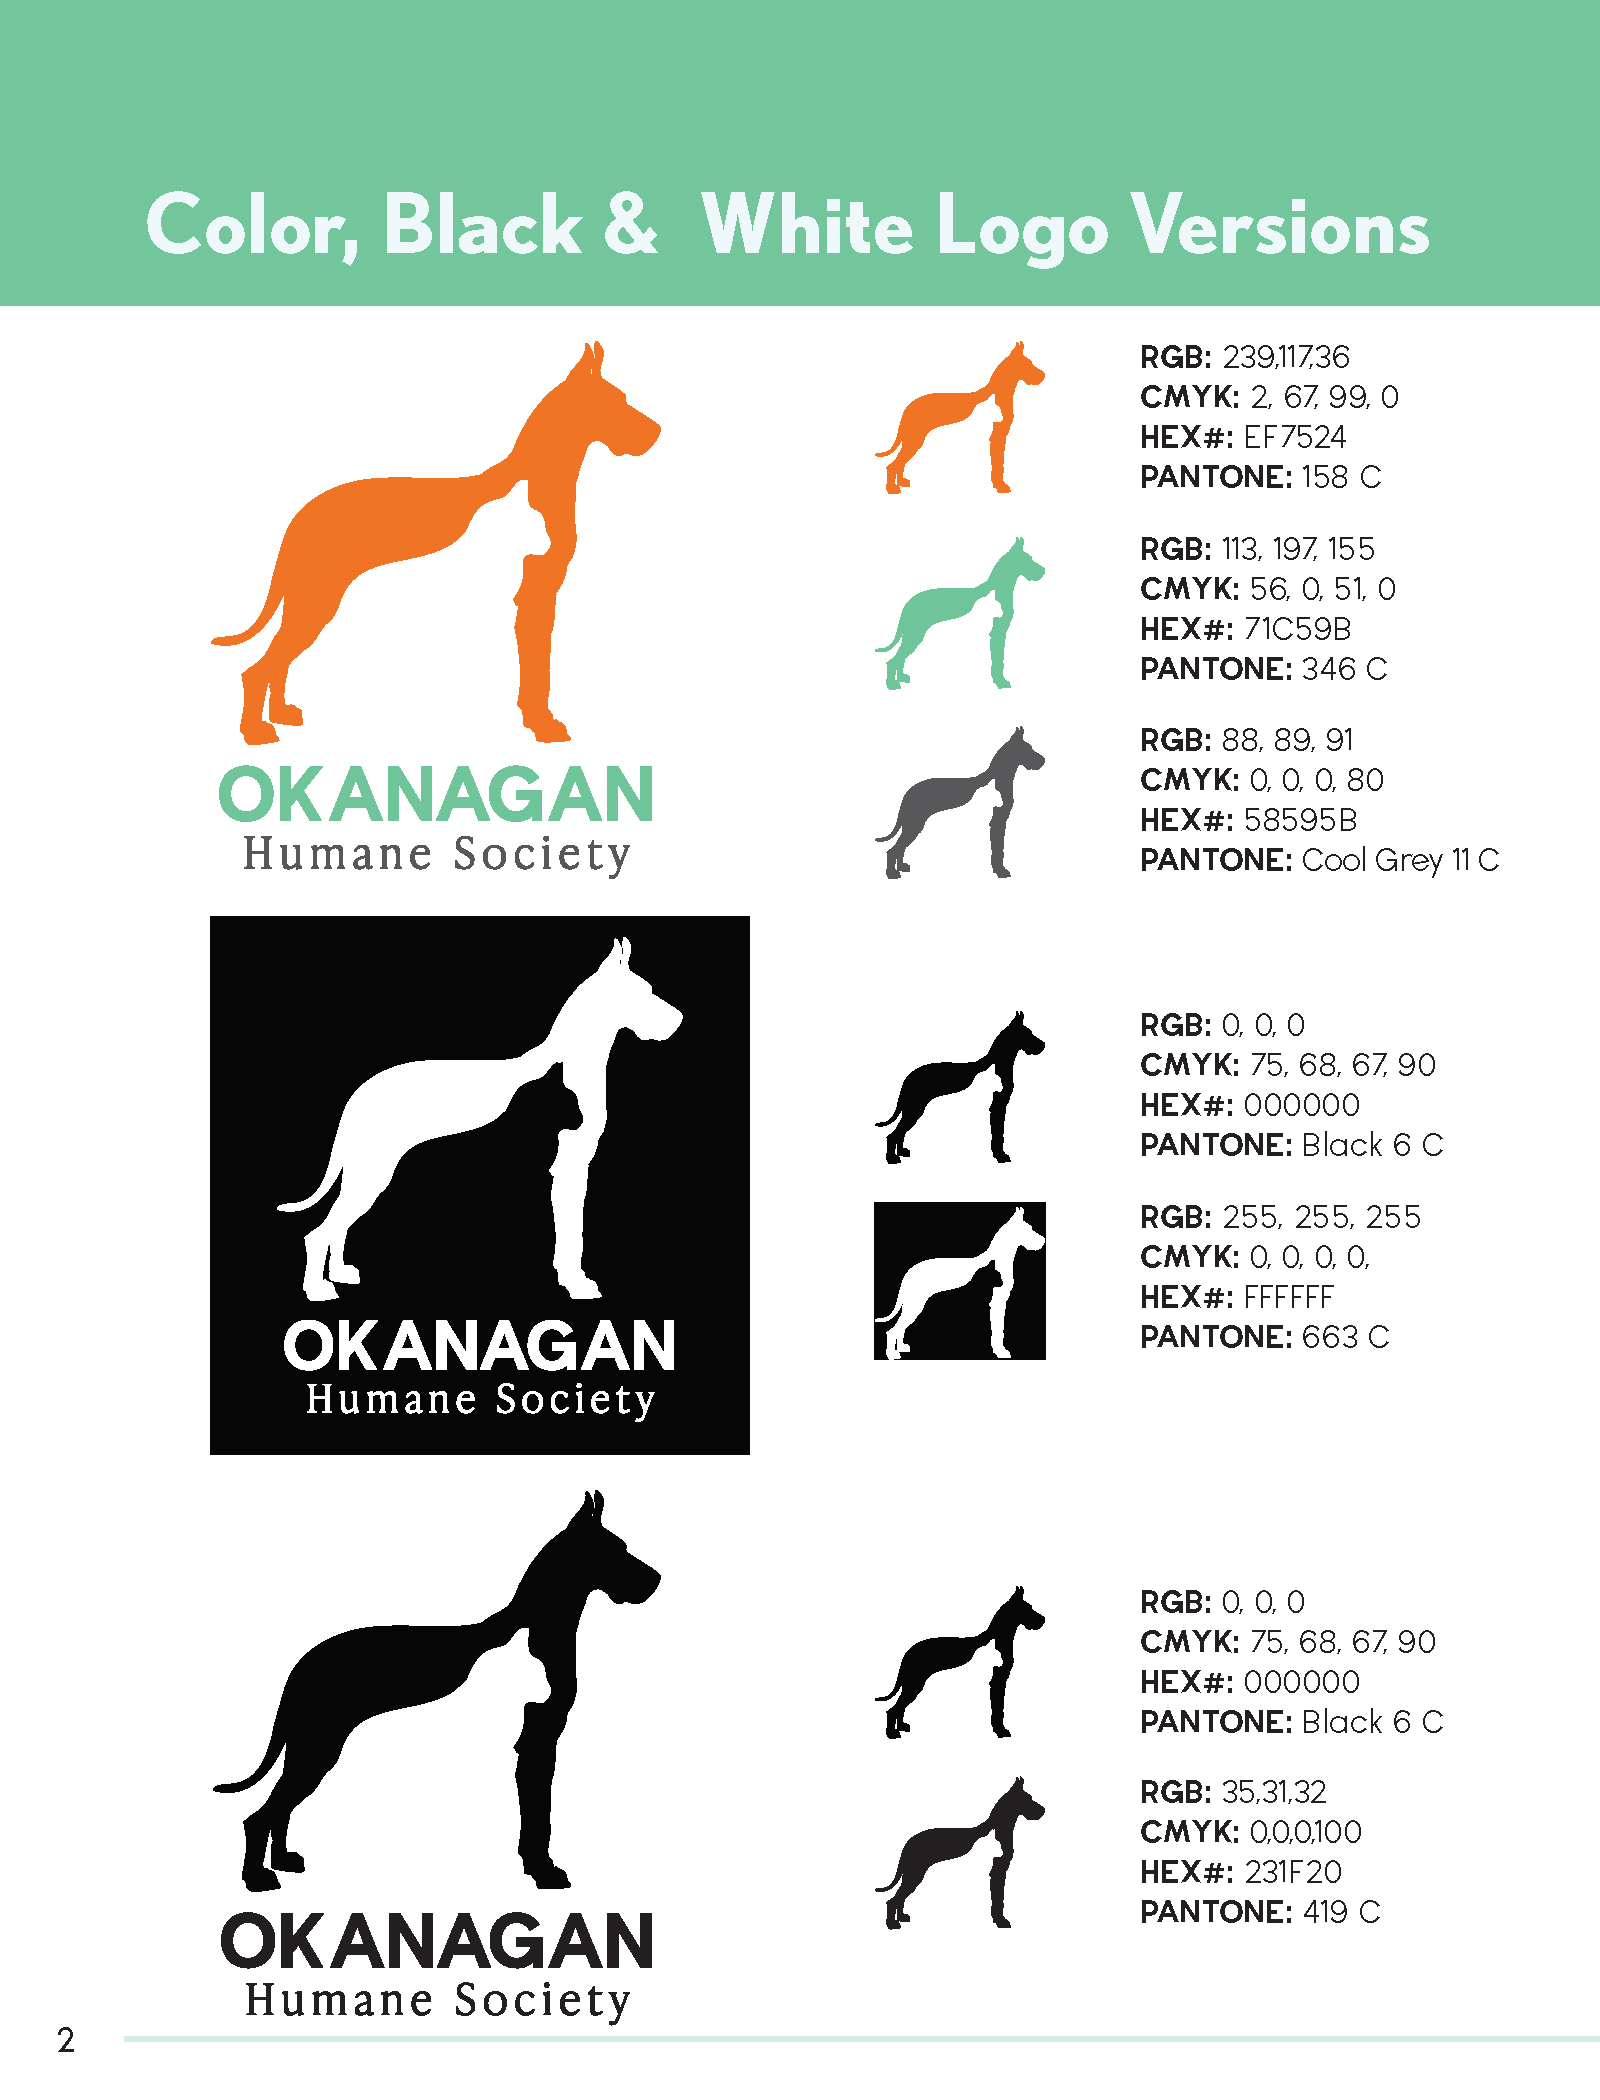 Logo specifications from the Okanagan Humane Society brand guide